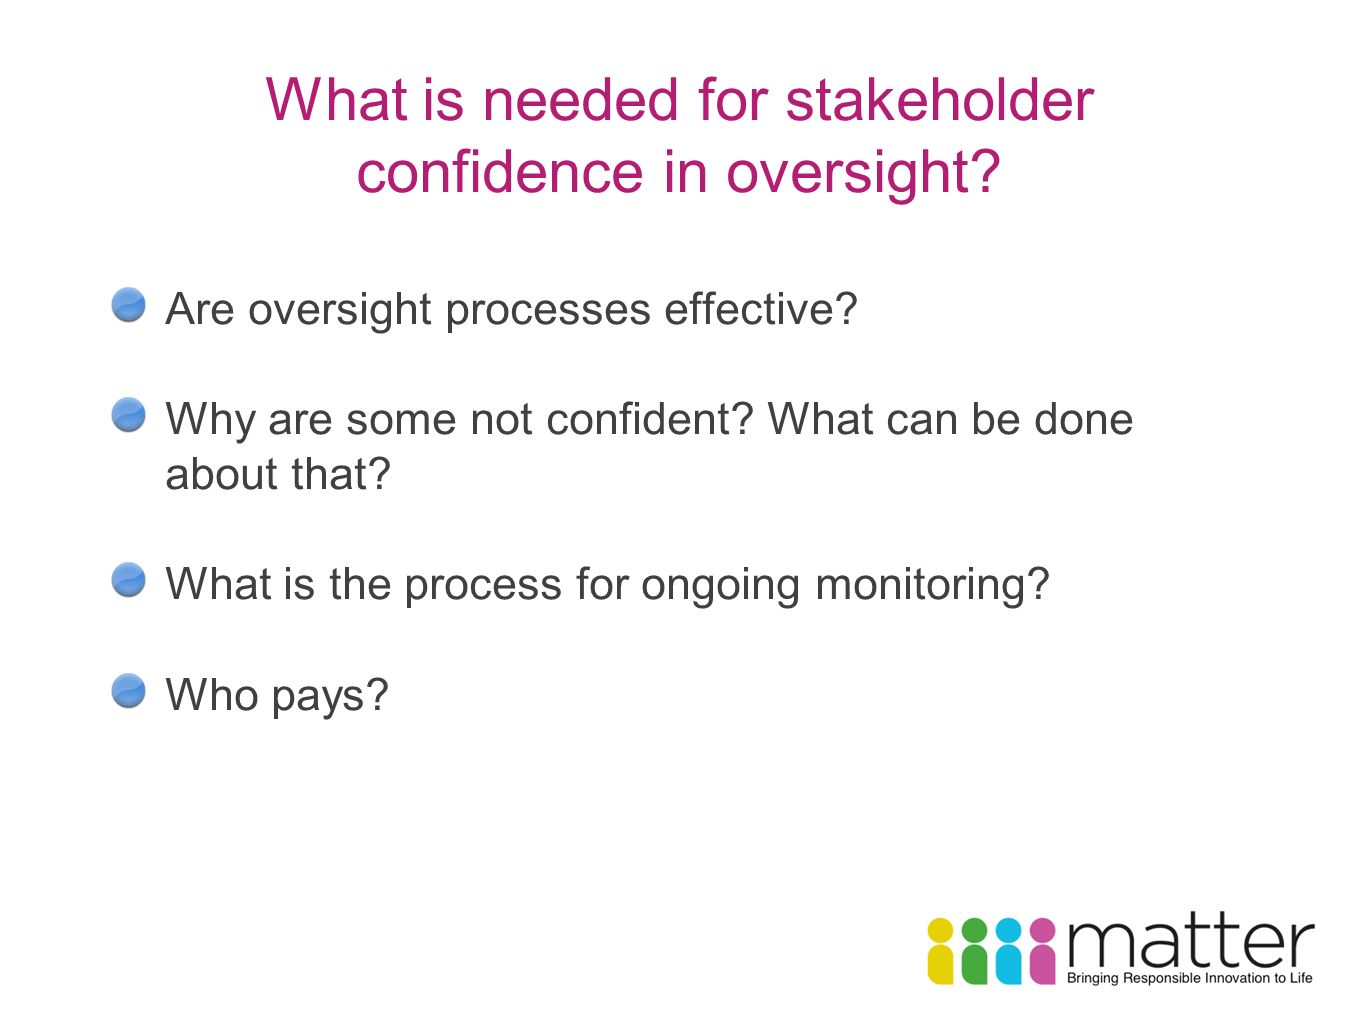 What is needed for stakeholder confidence in oversight.